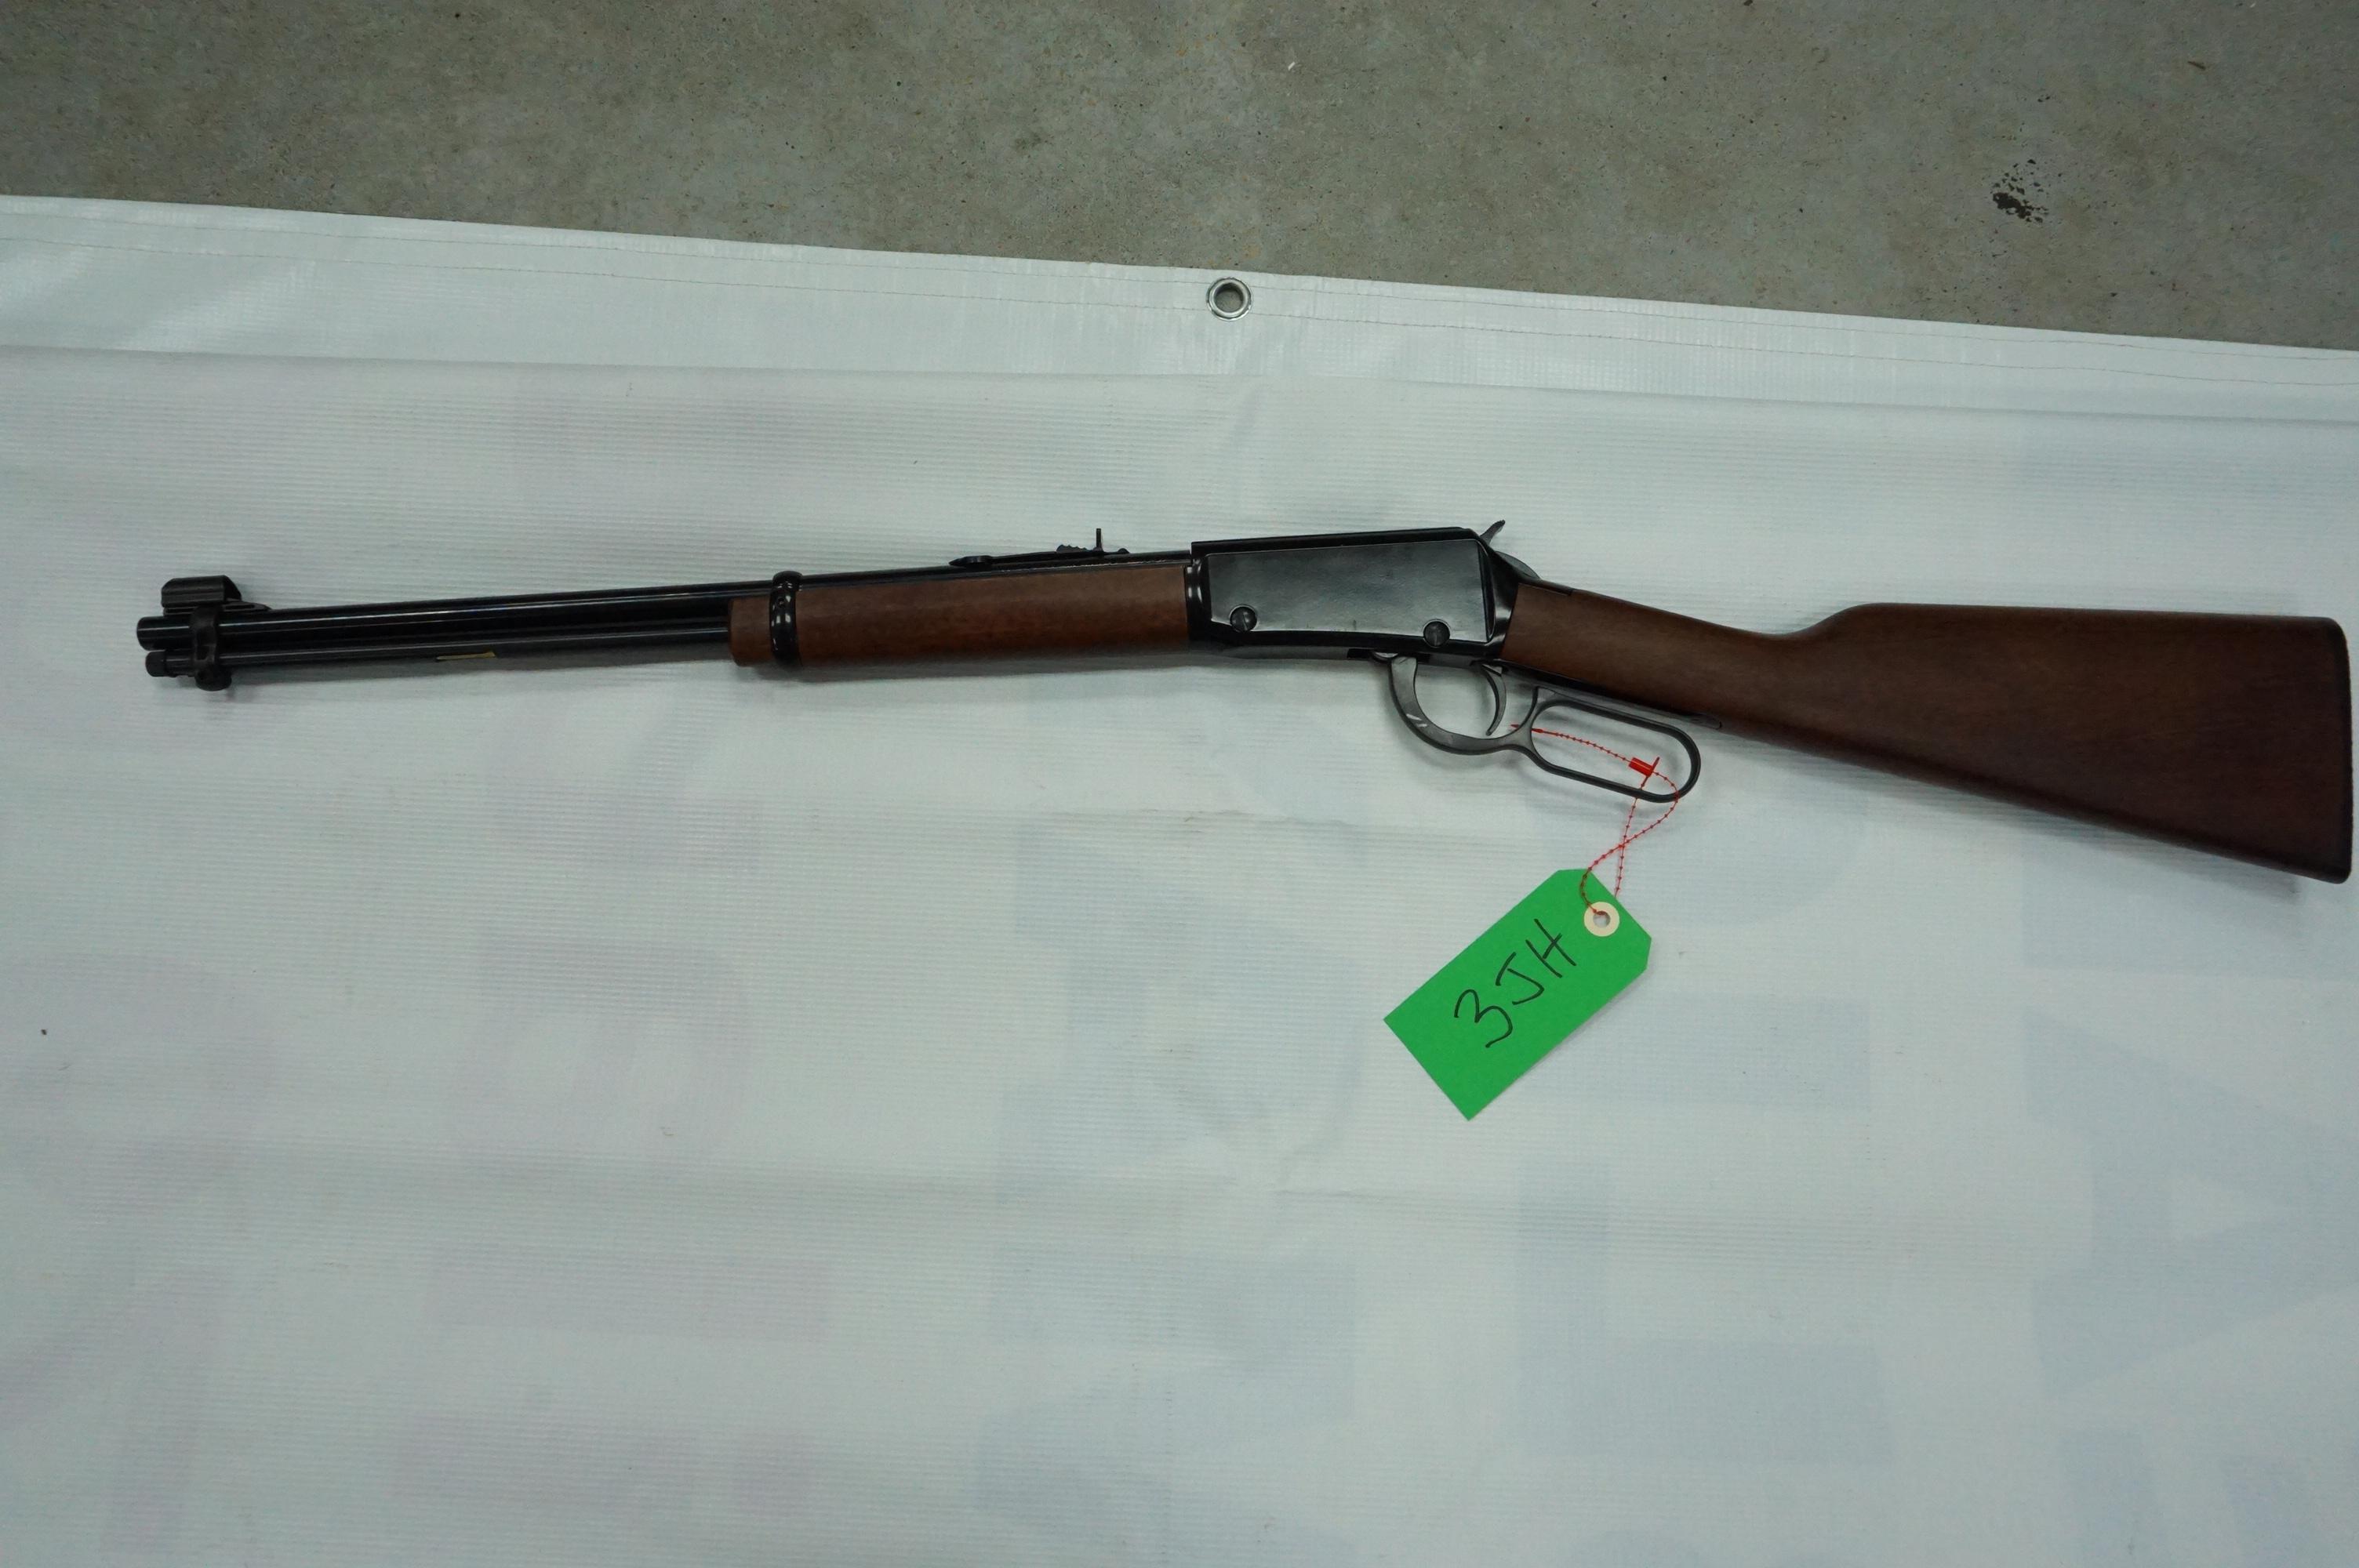 Conroe Texas Estate Find: Clean Henry Lever Action Rifle, .22LR, Wood Stock Blued, Very Little Use